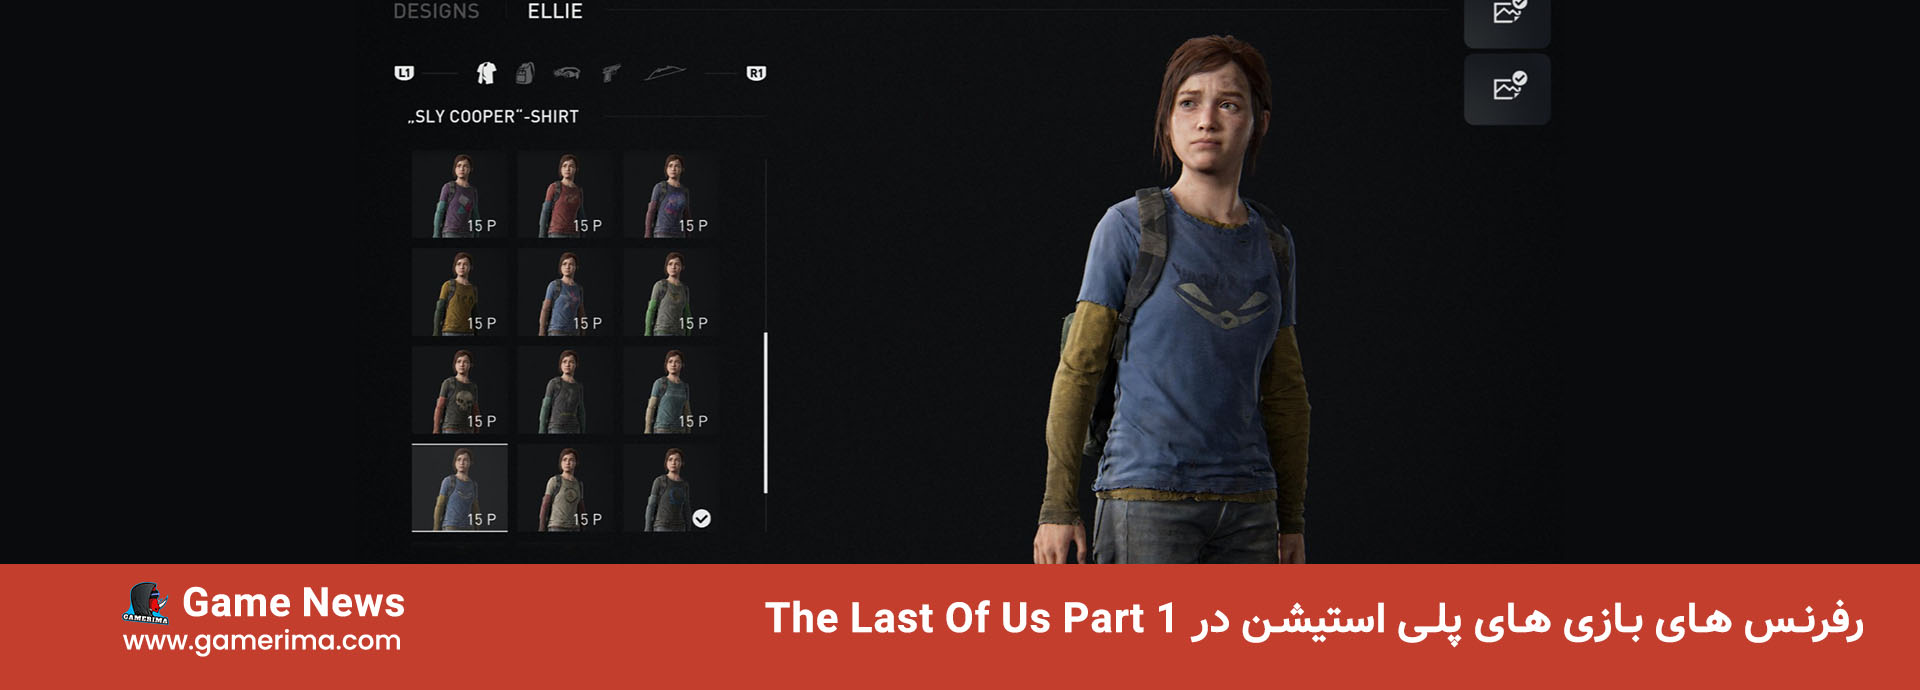 The Last of Us Part 1 clothes refrences